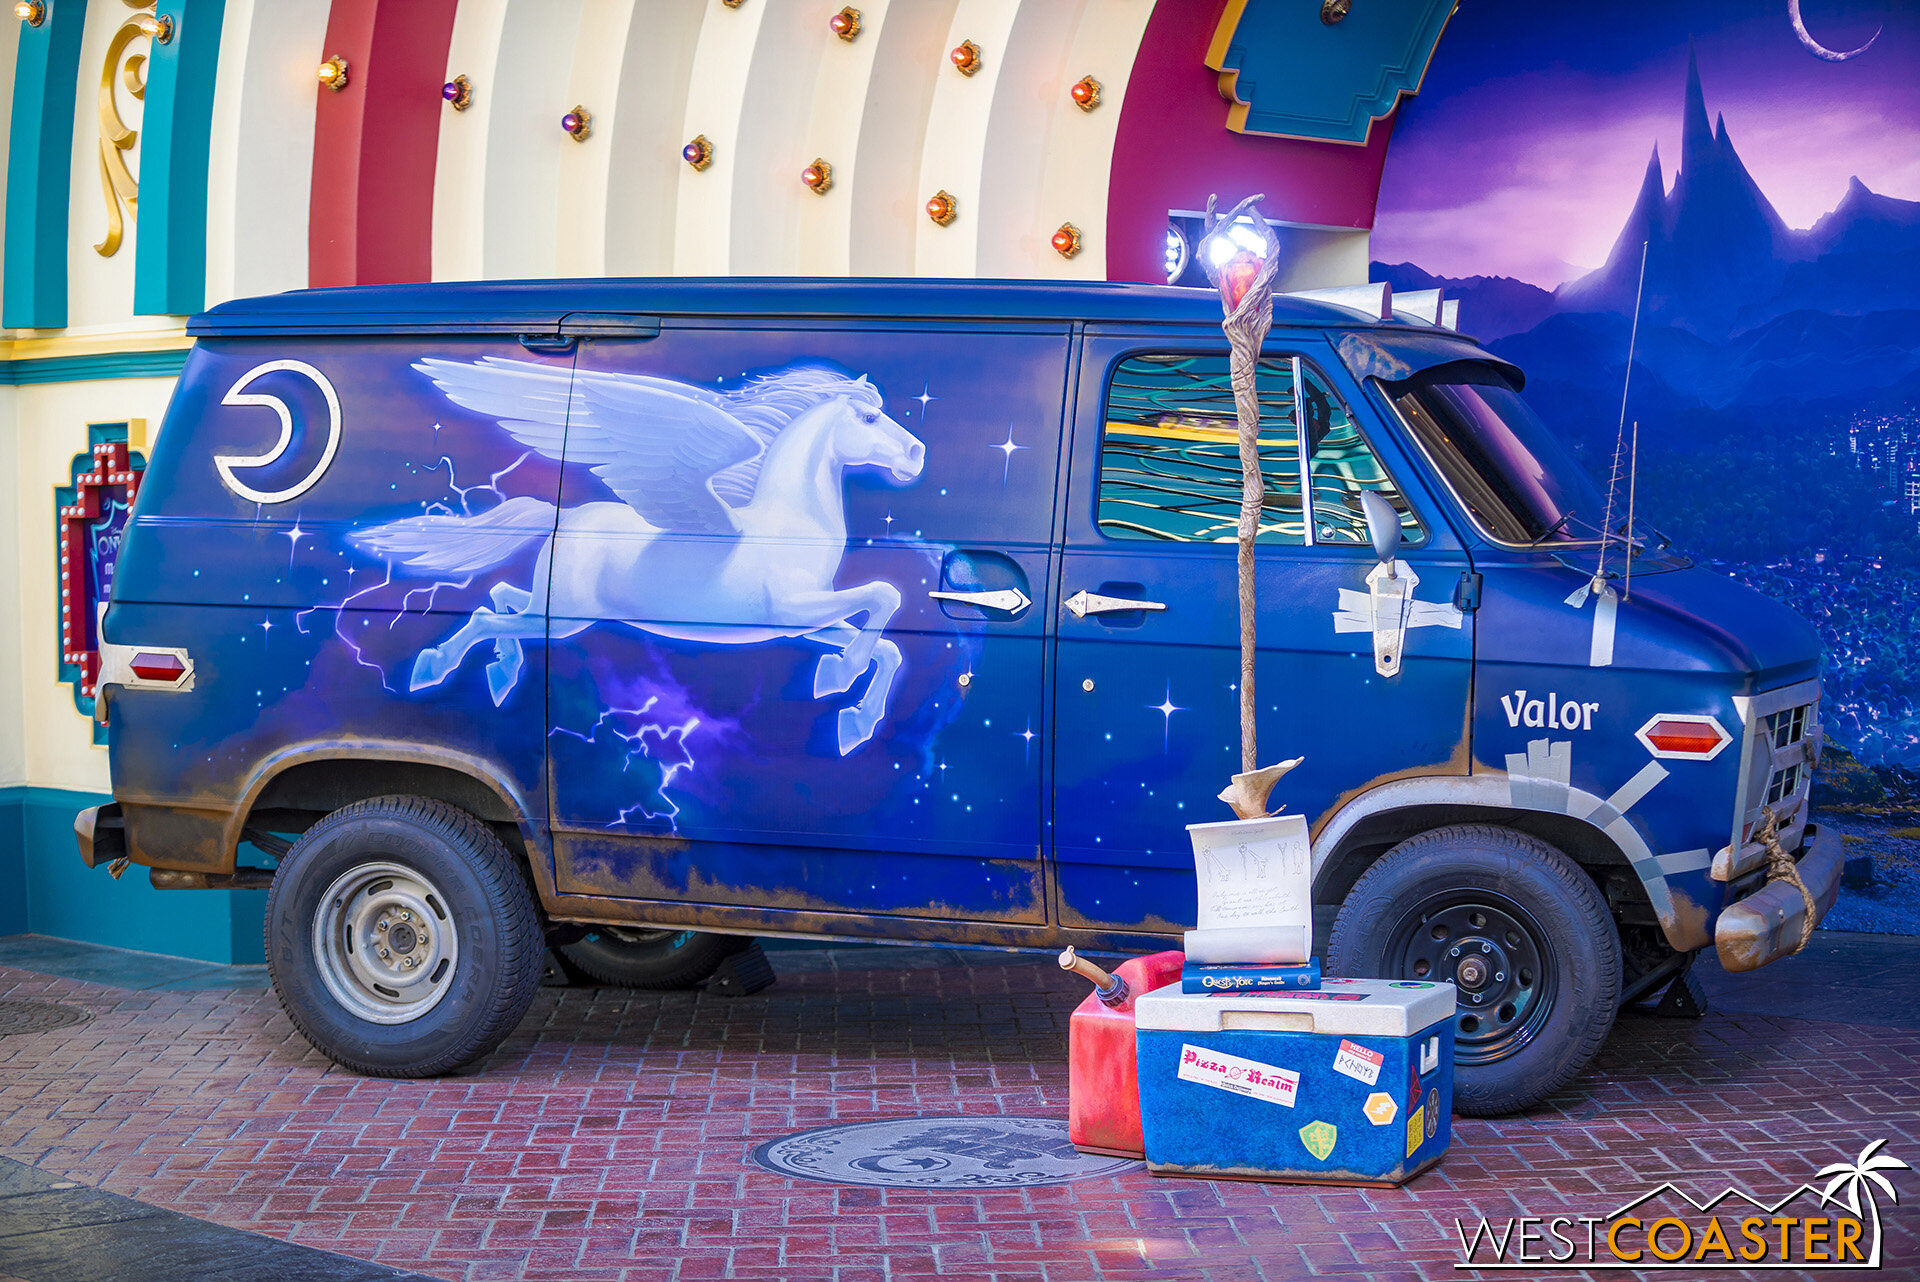  No characters (as far as I could tell), but here’s a van to take  Onward  photos with! 